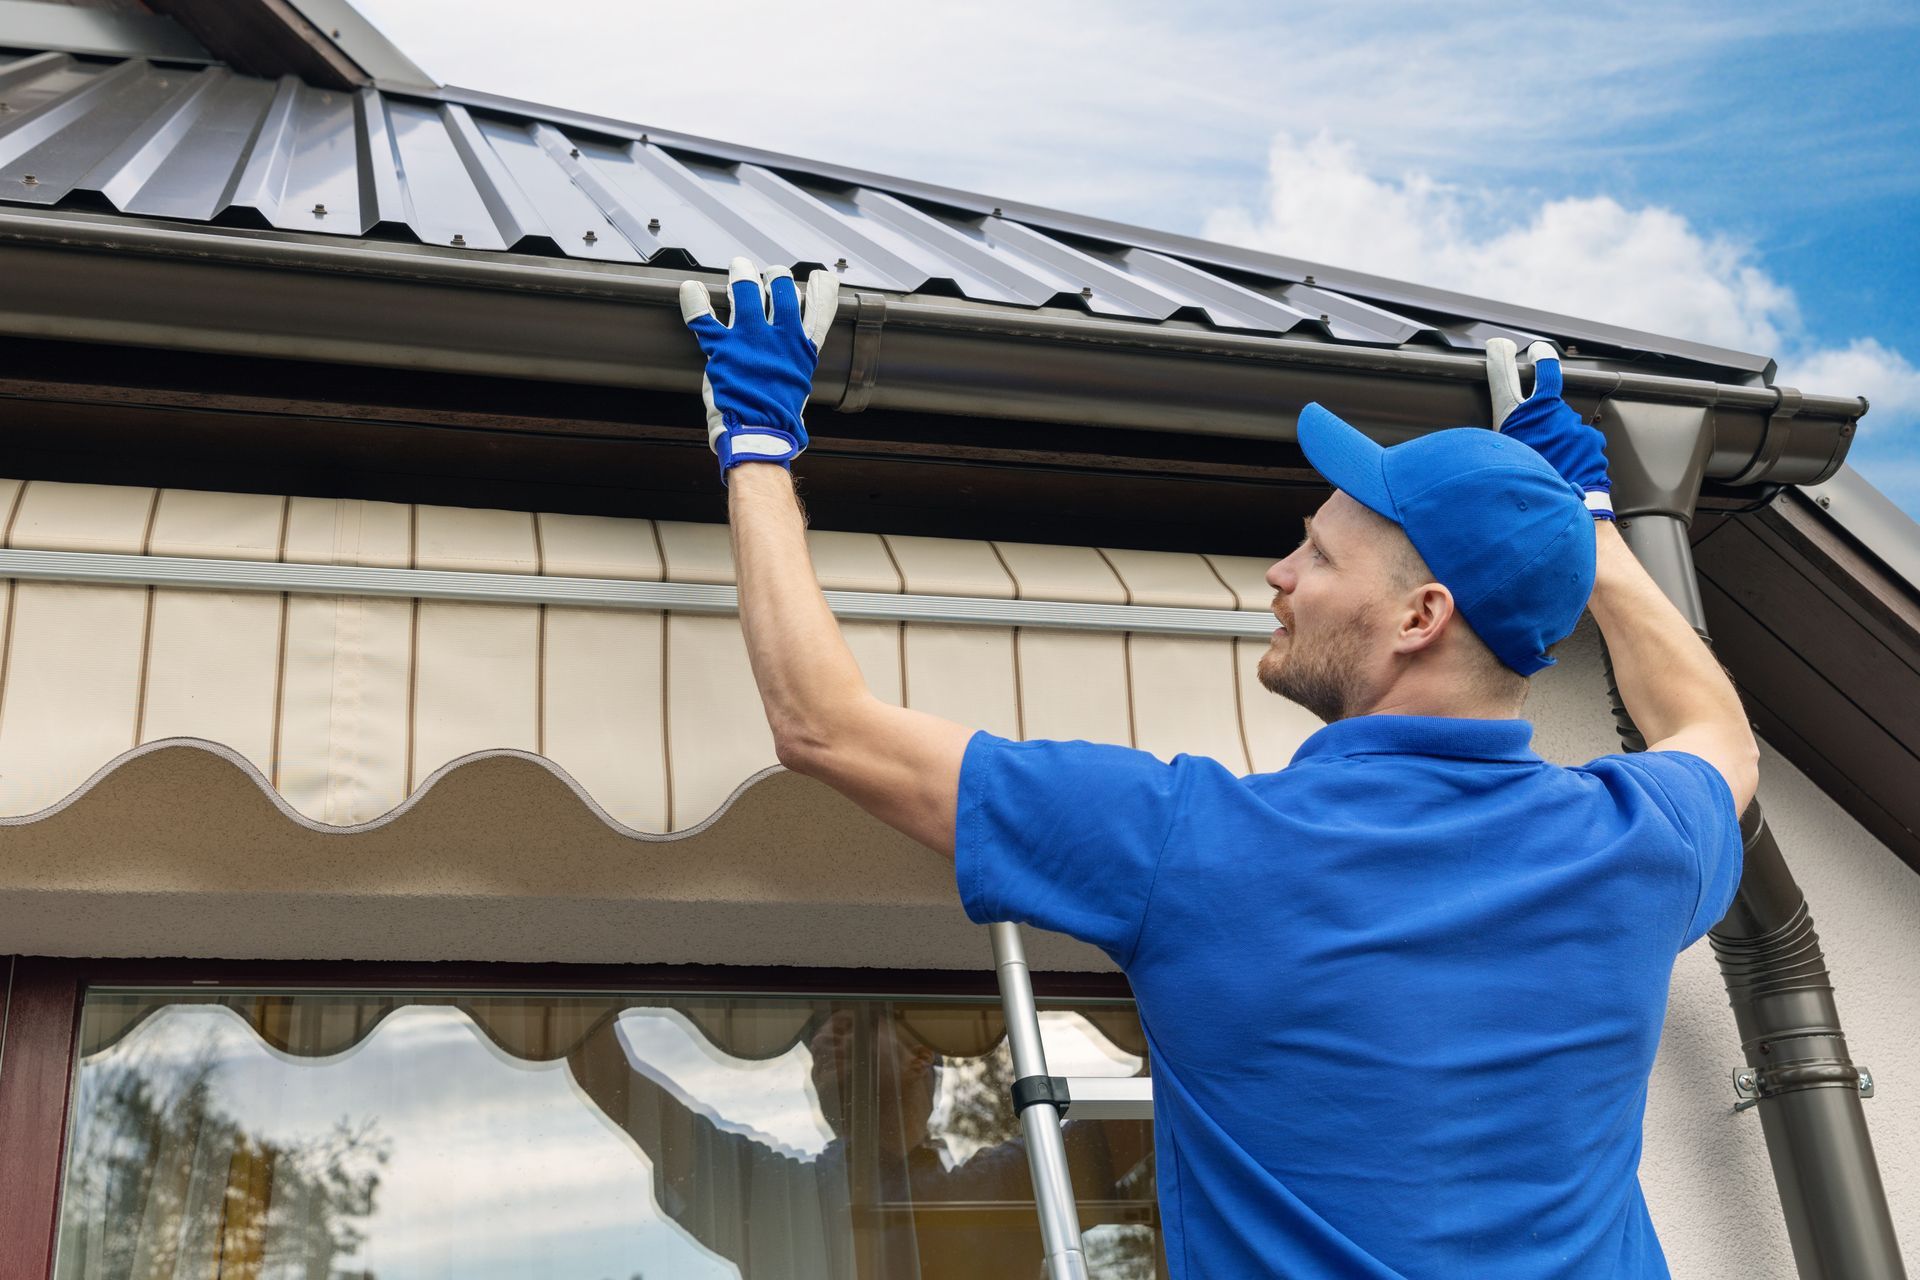 A man wearing work clothes is installing a rain gutter system on a house roof.